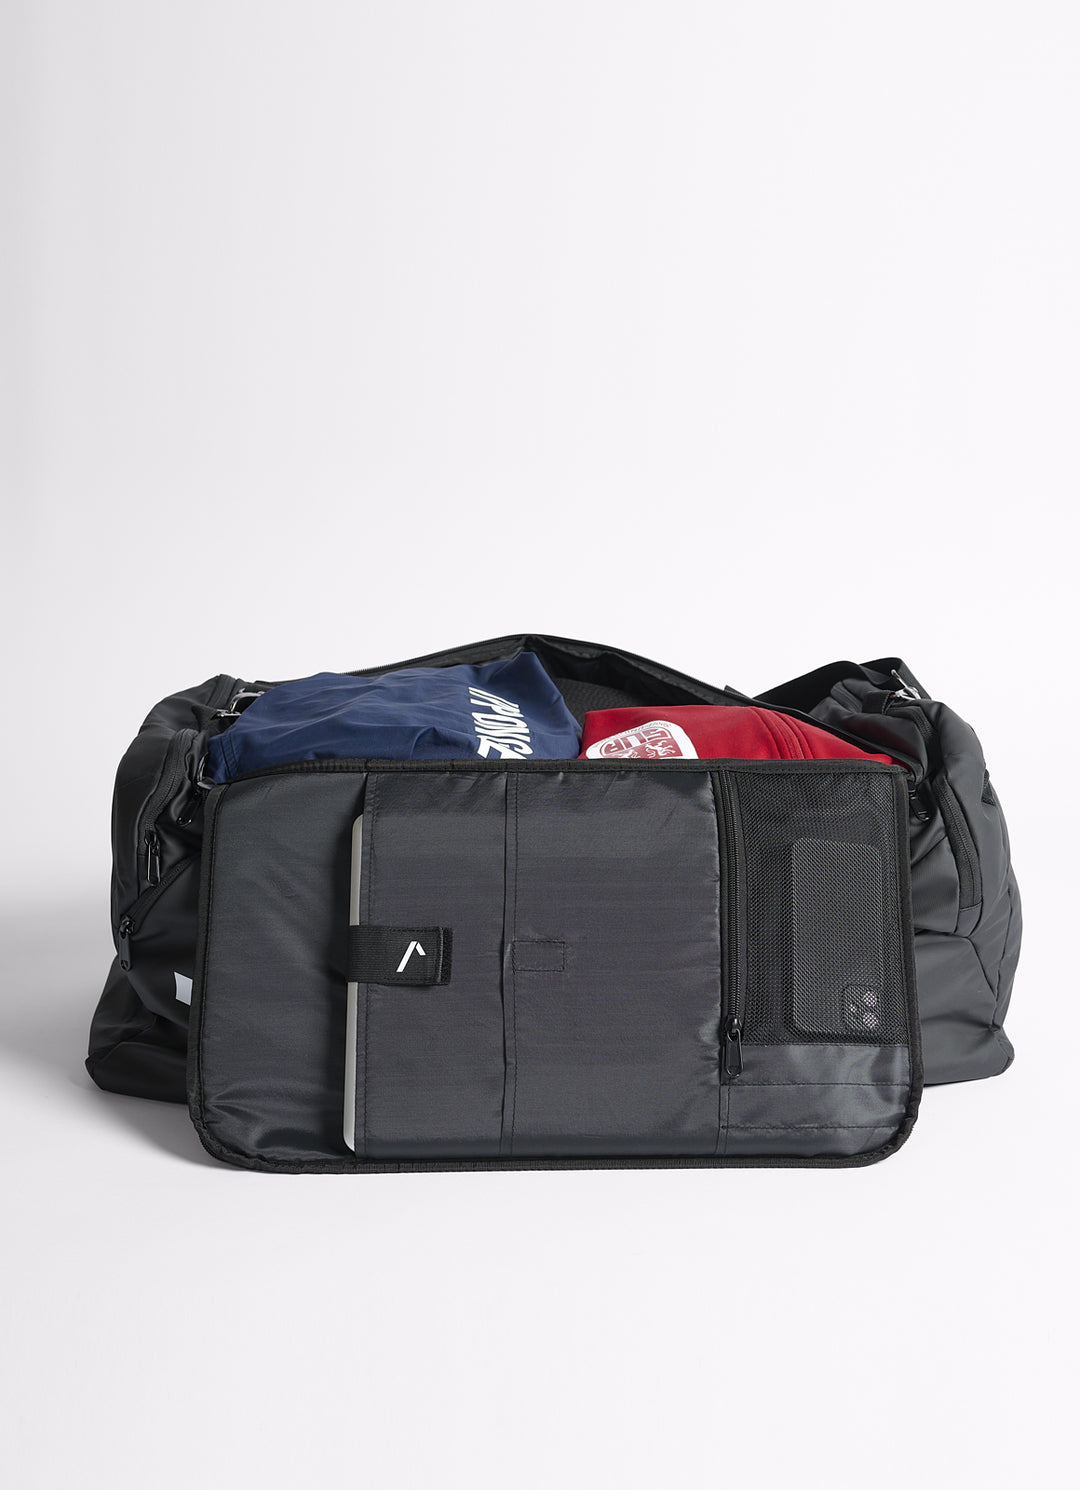 IPPON GEAR 2 in 1 sports bag Fighter